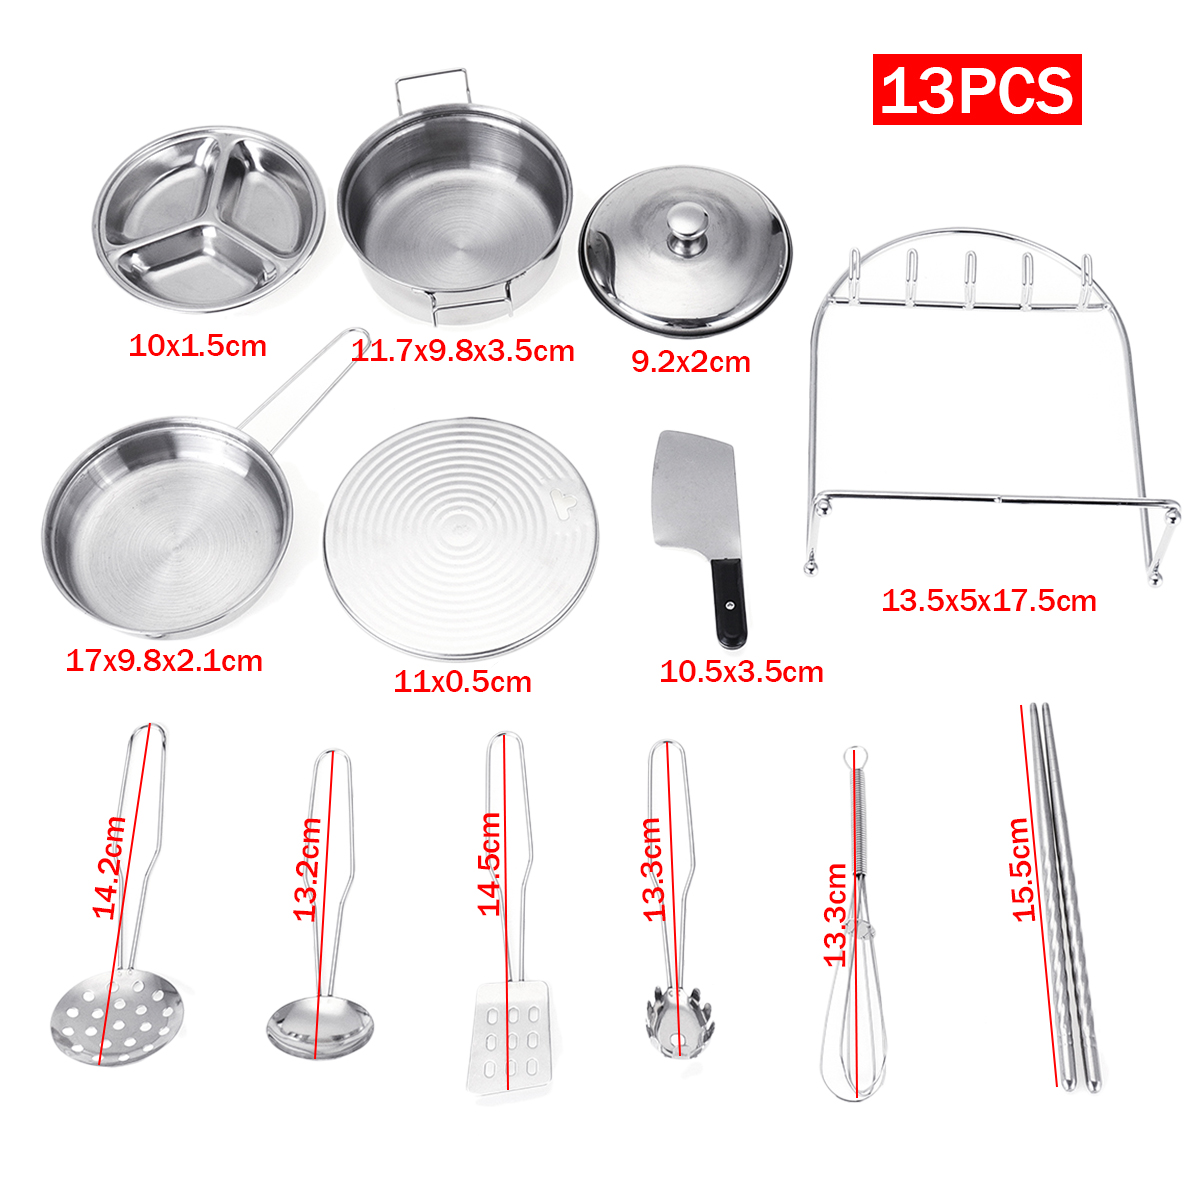 32PCS-Mini-Stainless-Steel-Kitchen-Cutlery-Play-House-Food-Toy-Boiler-Kettle-Cup-Bowl-Spoon-Cookware-1423237-5